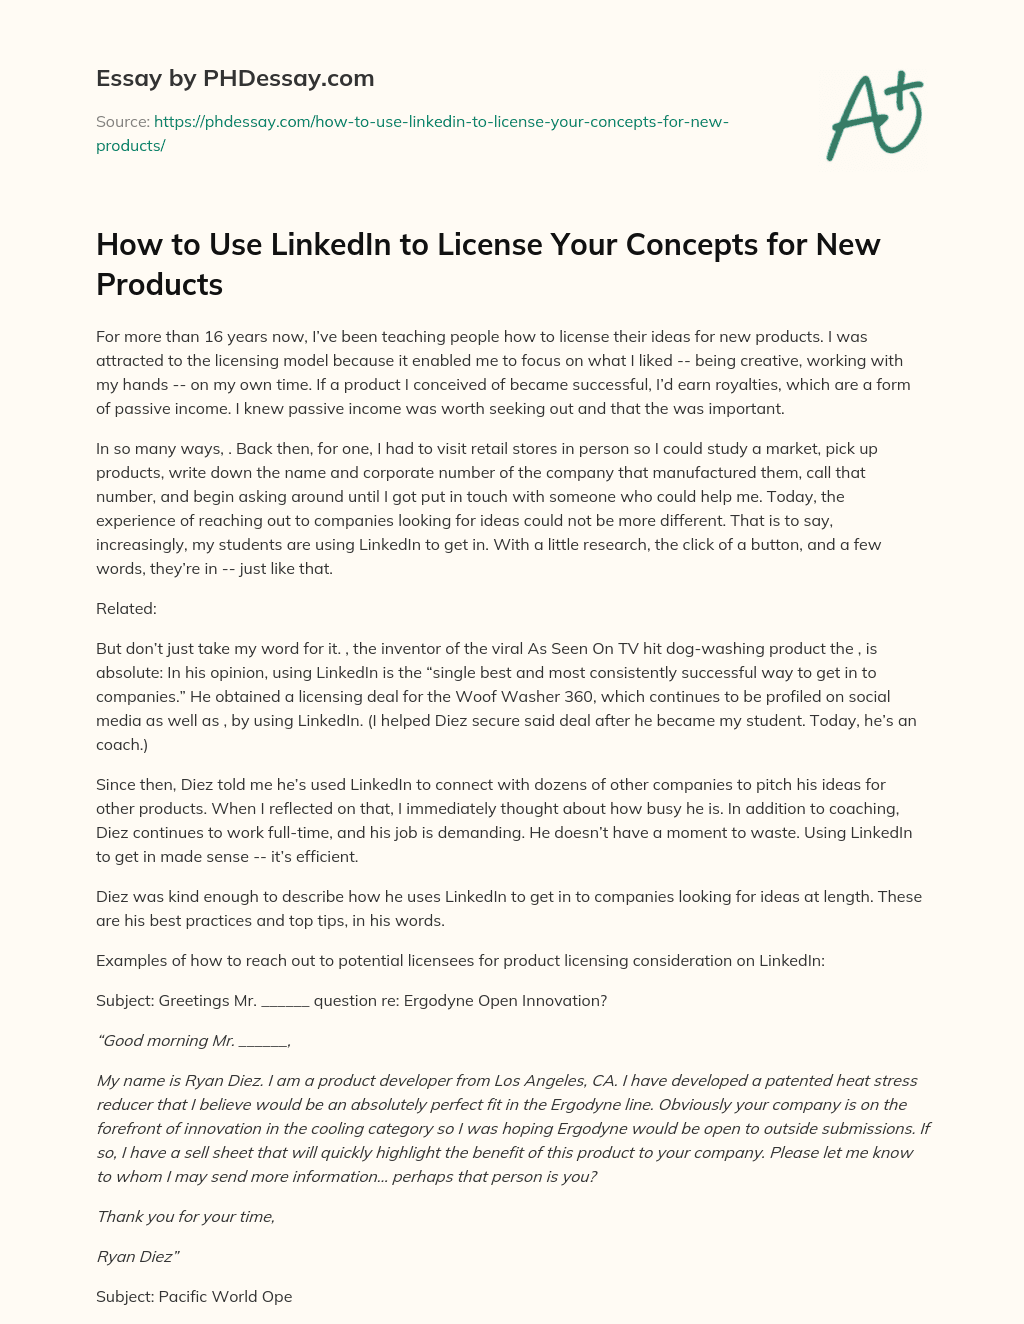 How to Use LinkedIn to License Your Concepts for New Products essay